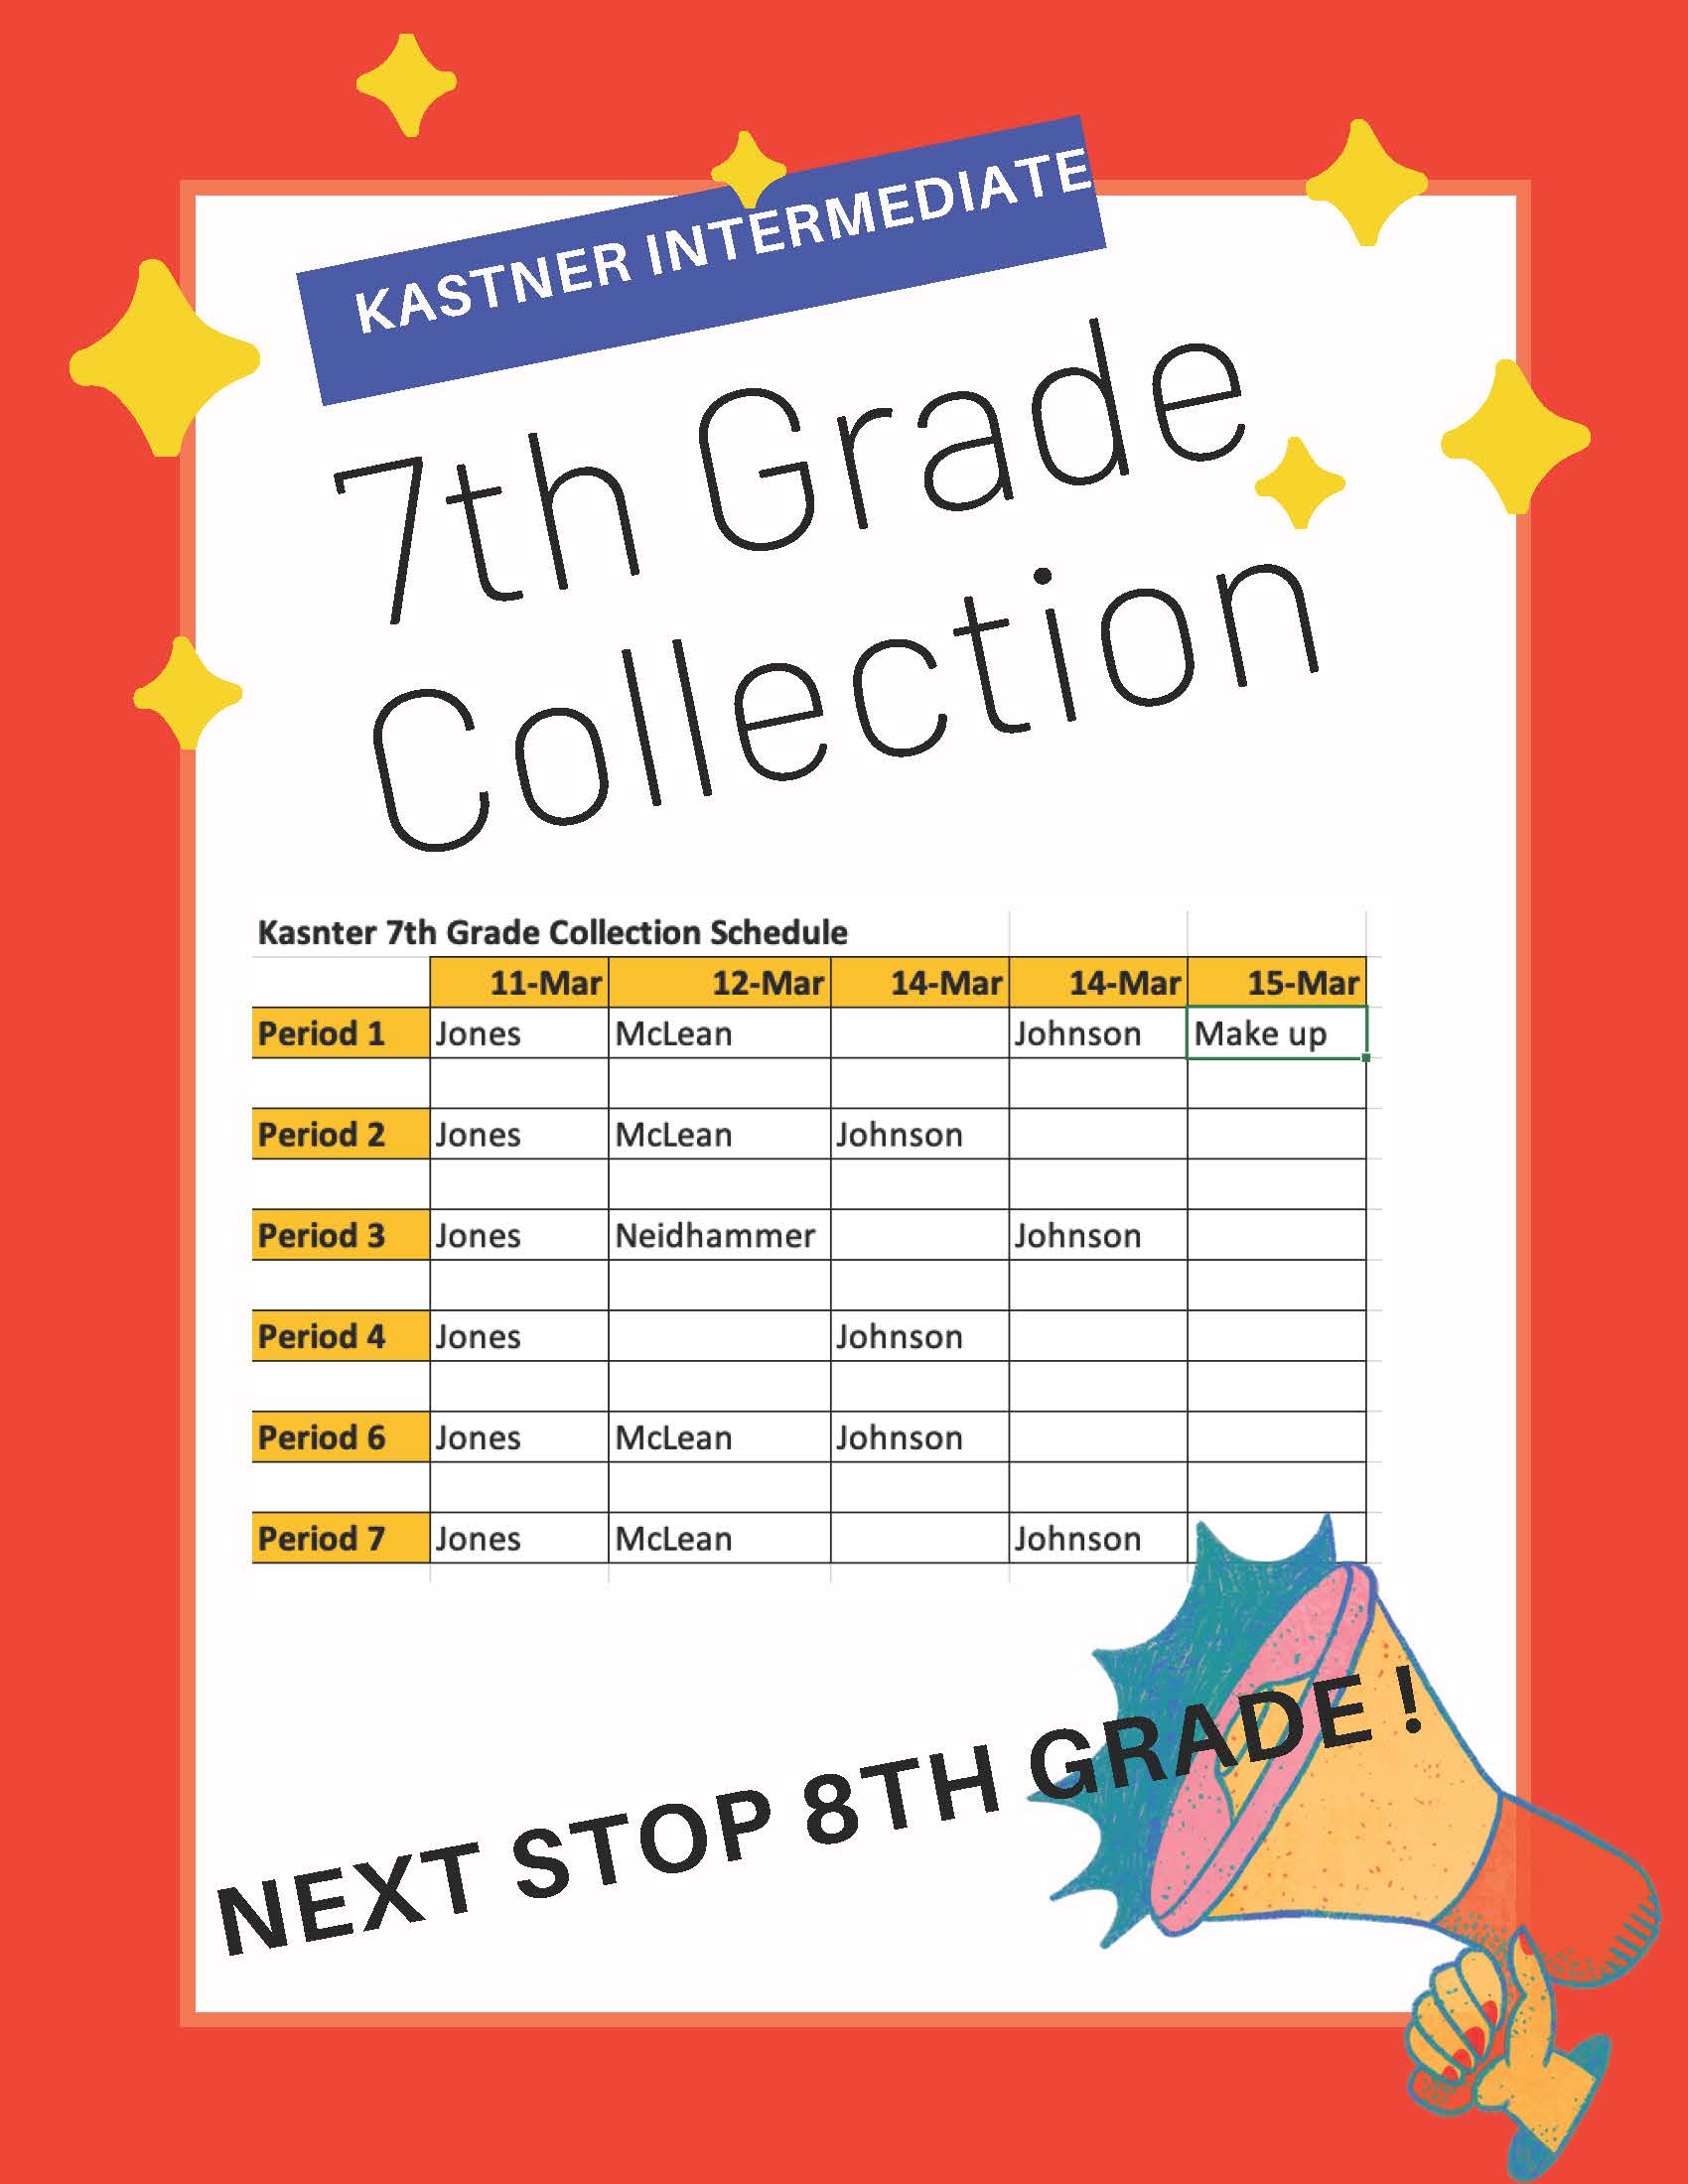 7th grade collection schedule